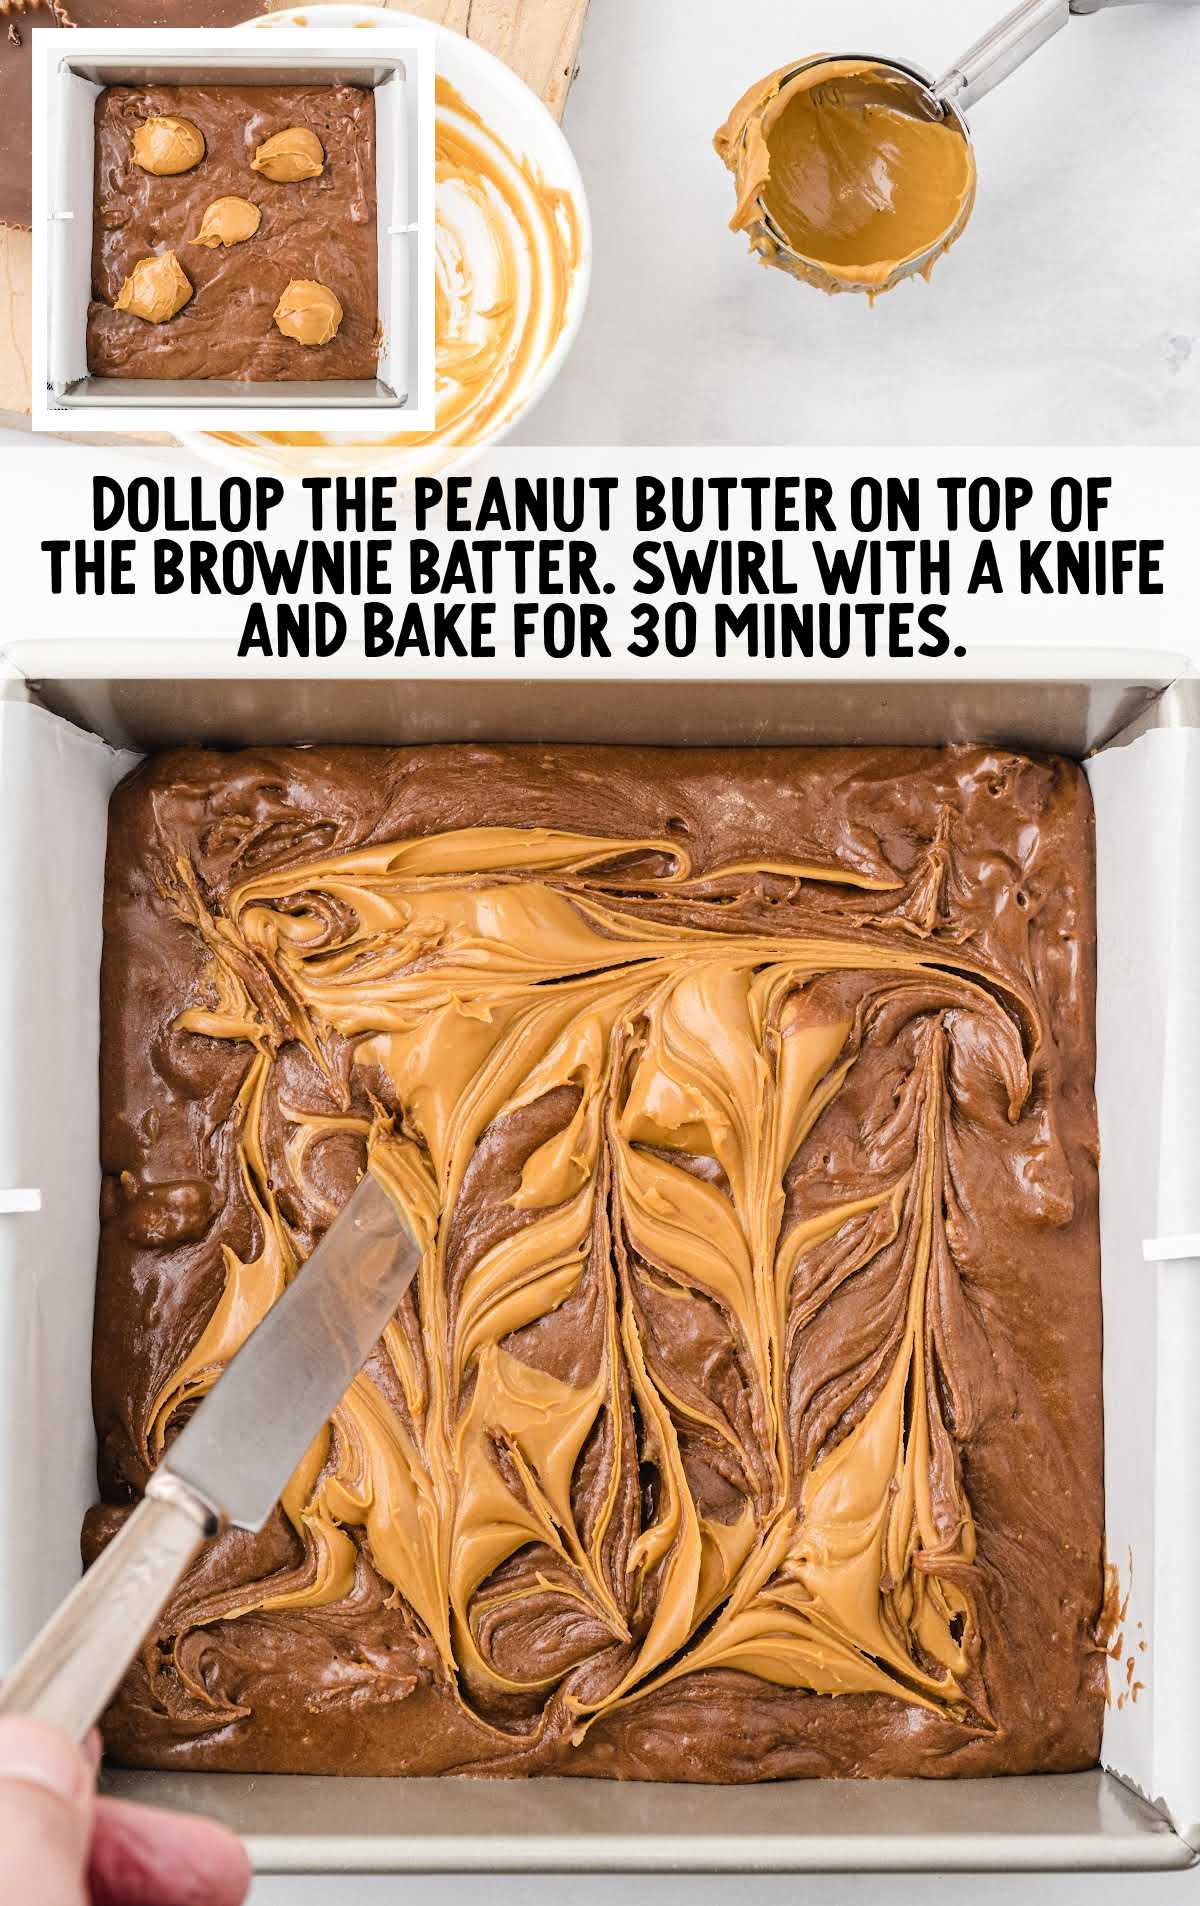 scoops of peanut butter placed on top of the brownie mixture then swirled in a baking dish